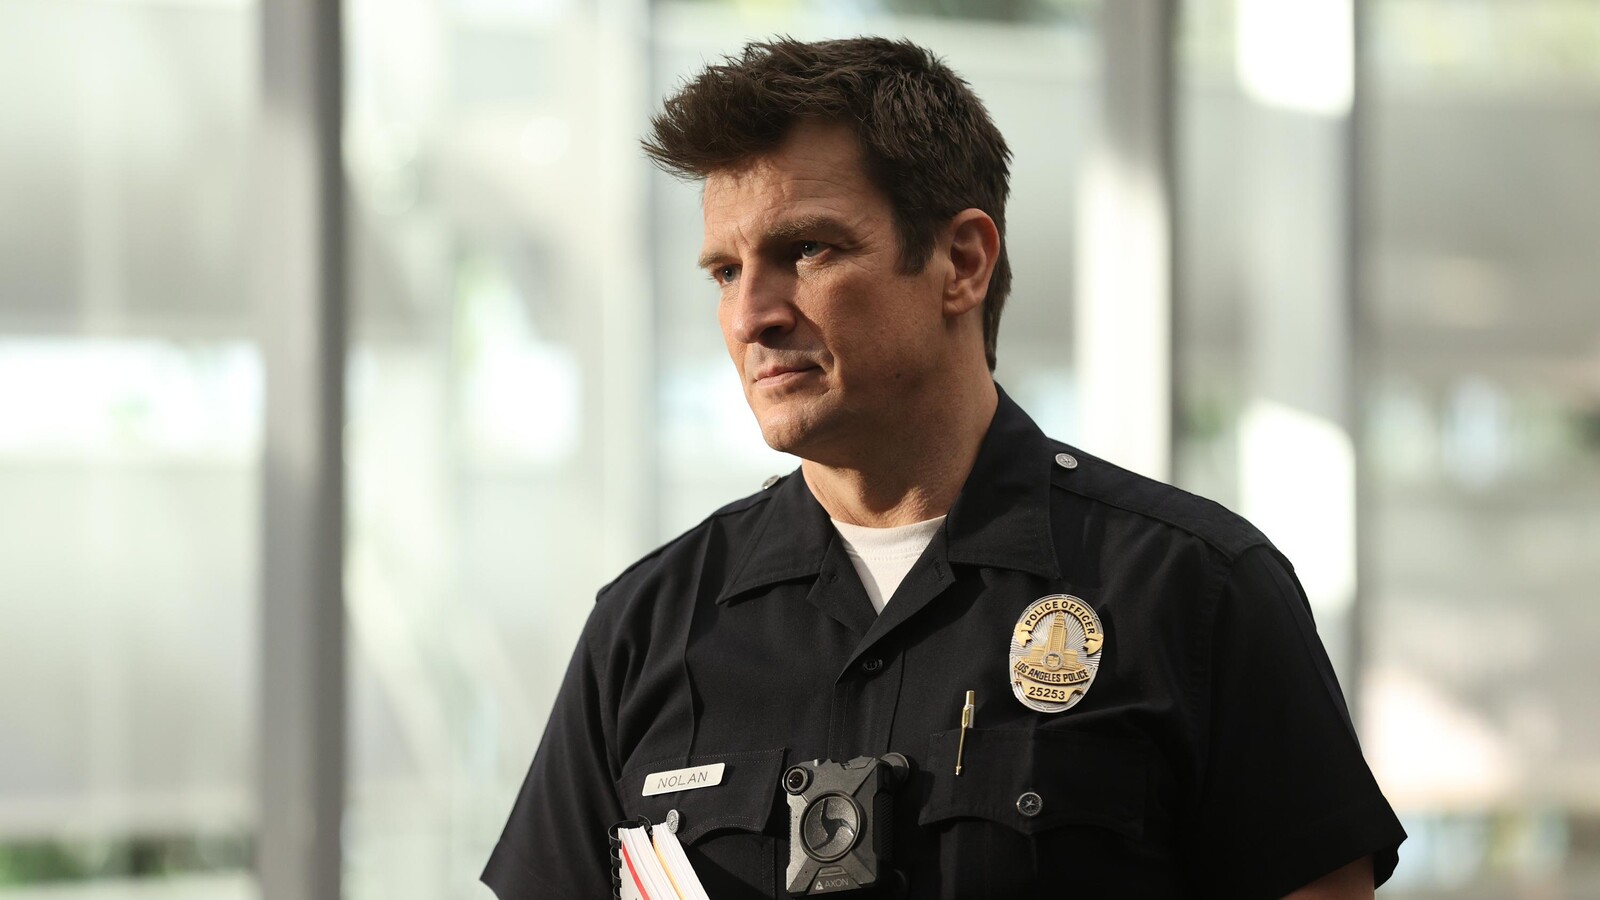 The Rookie season 5 will see John Nolan become a training officer